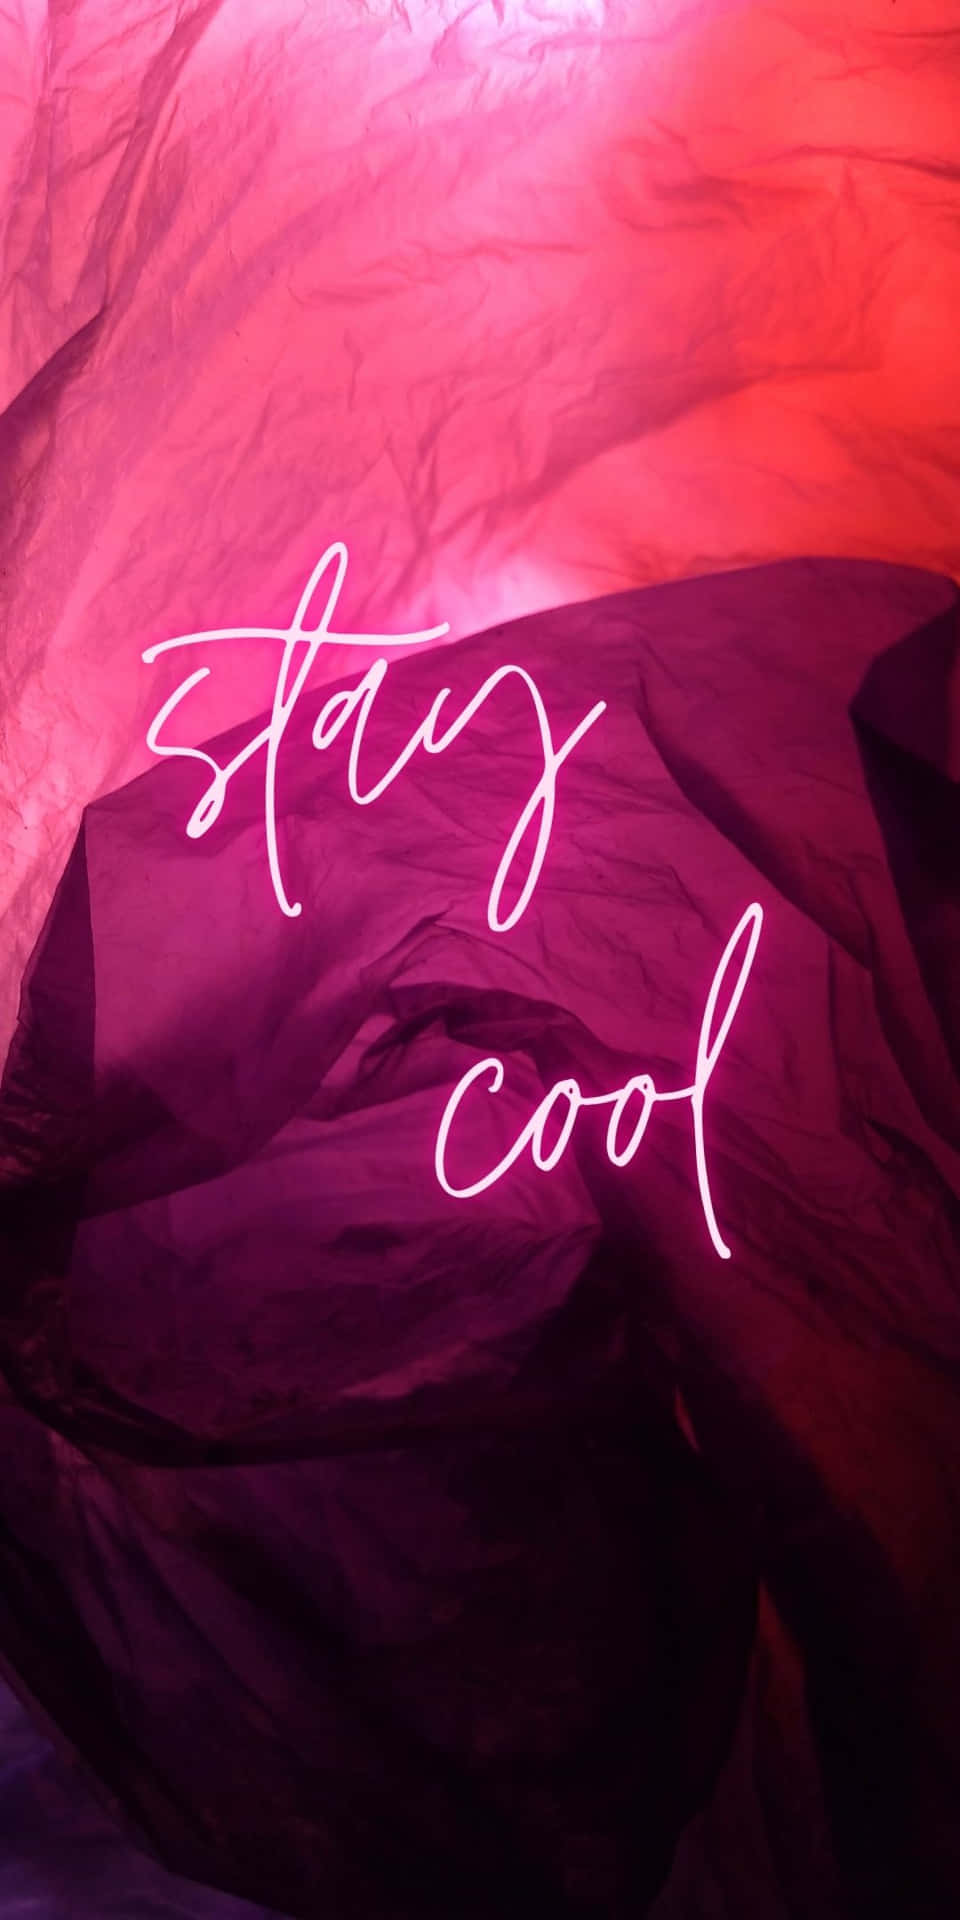 Stay Cool - A Neon Sign